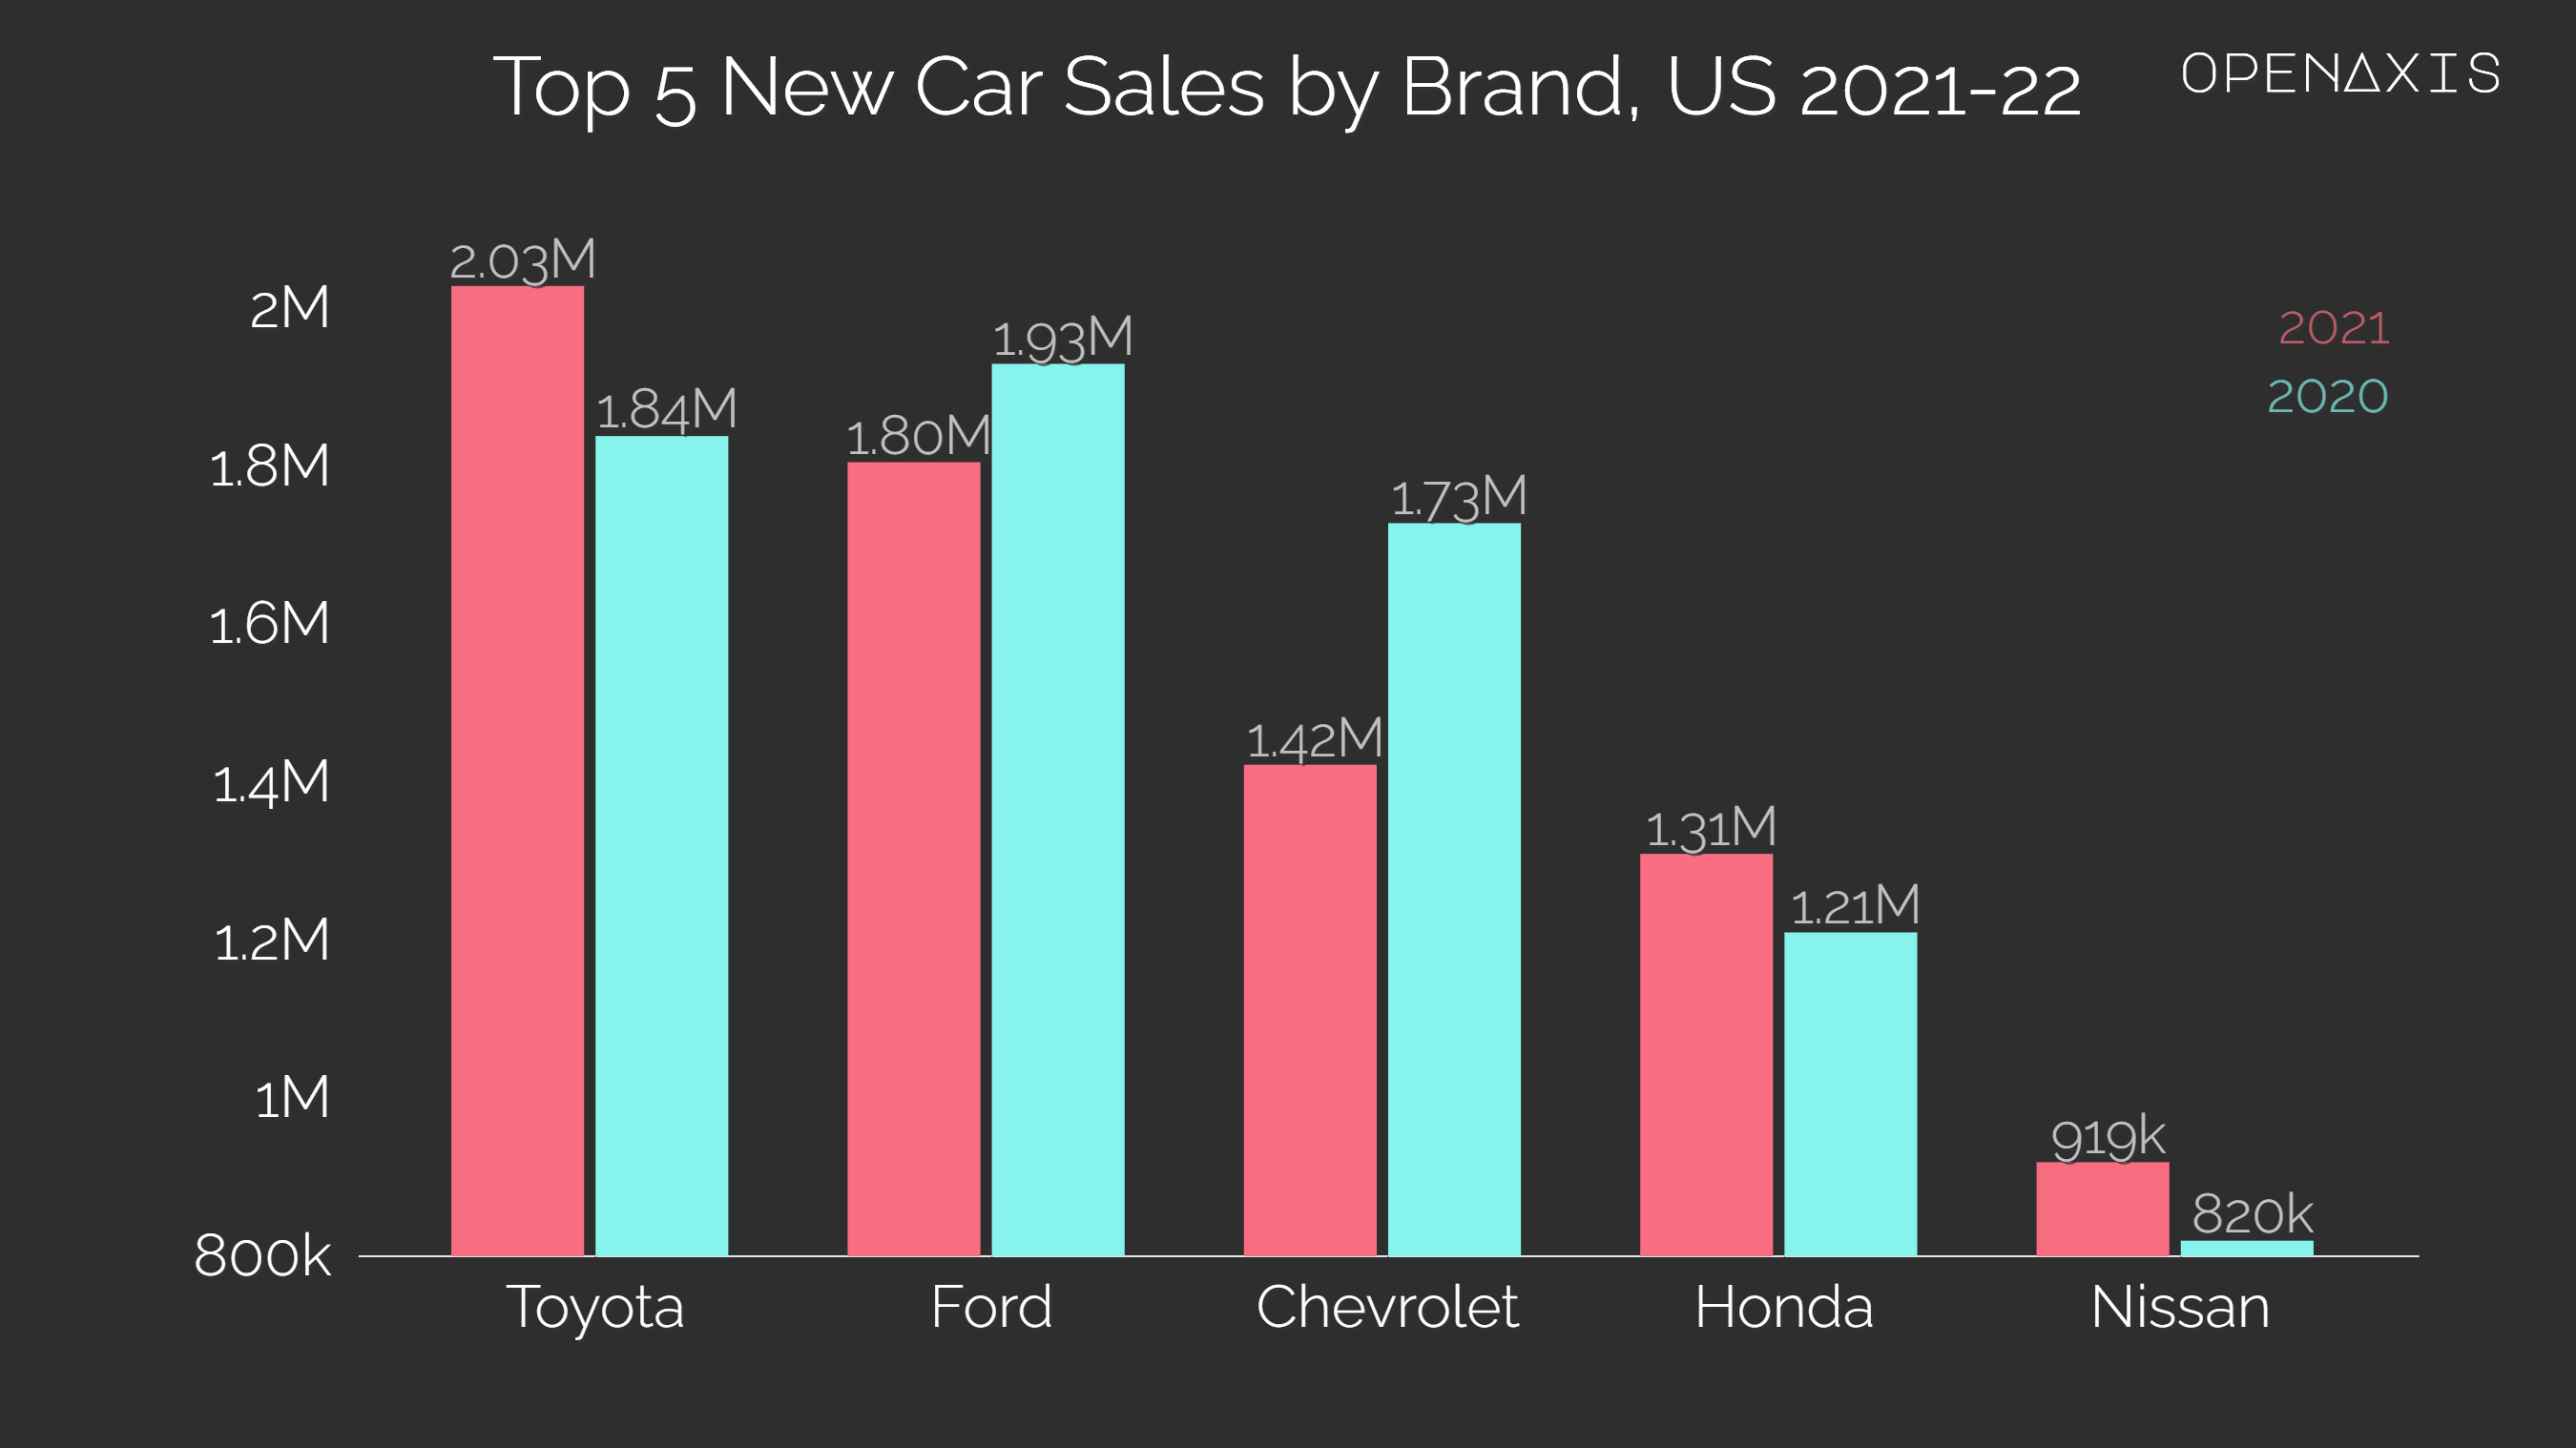 "Top 5 New Car Sales by Brand, US 2021-22"